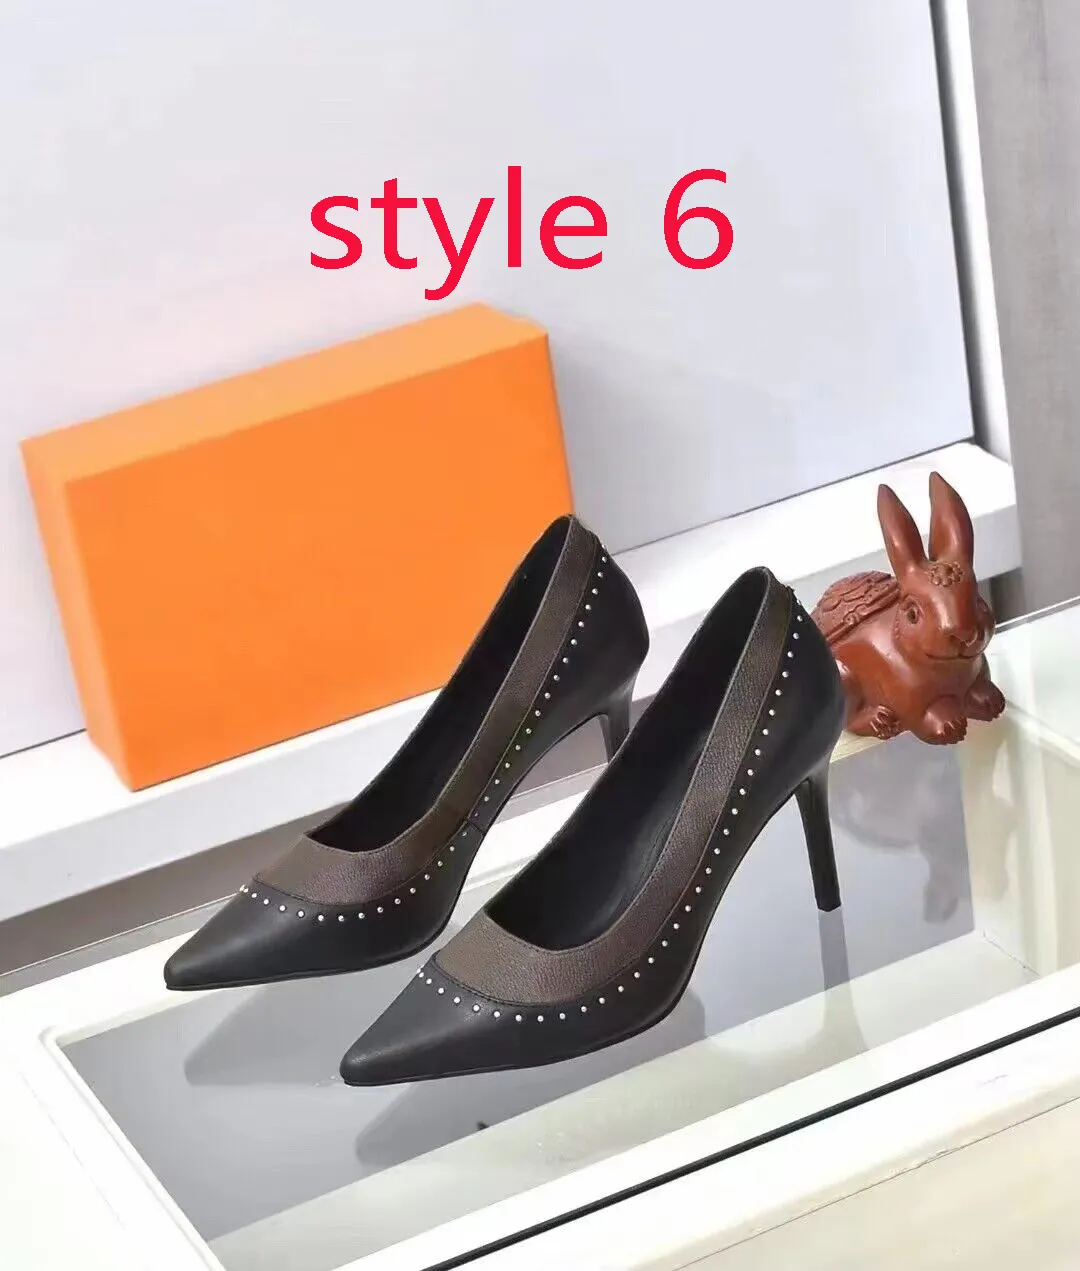 Dress shoes Classic high-heeled boat shoe Designer leather rivet Thick heel high heels 100% cowhide Metal Button women Pointed letter SHoes Large size 34-42 us4-us11